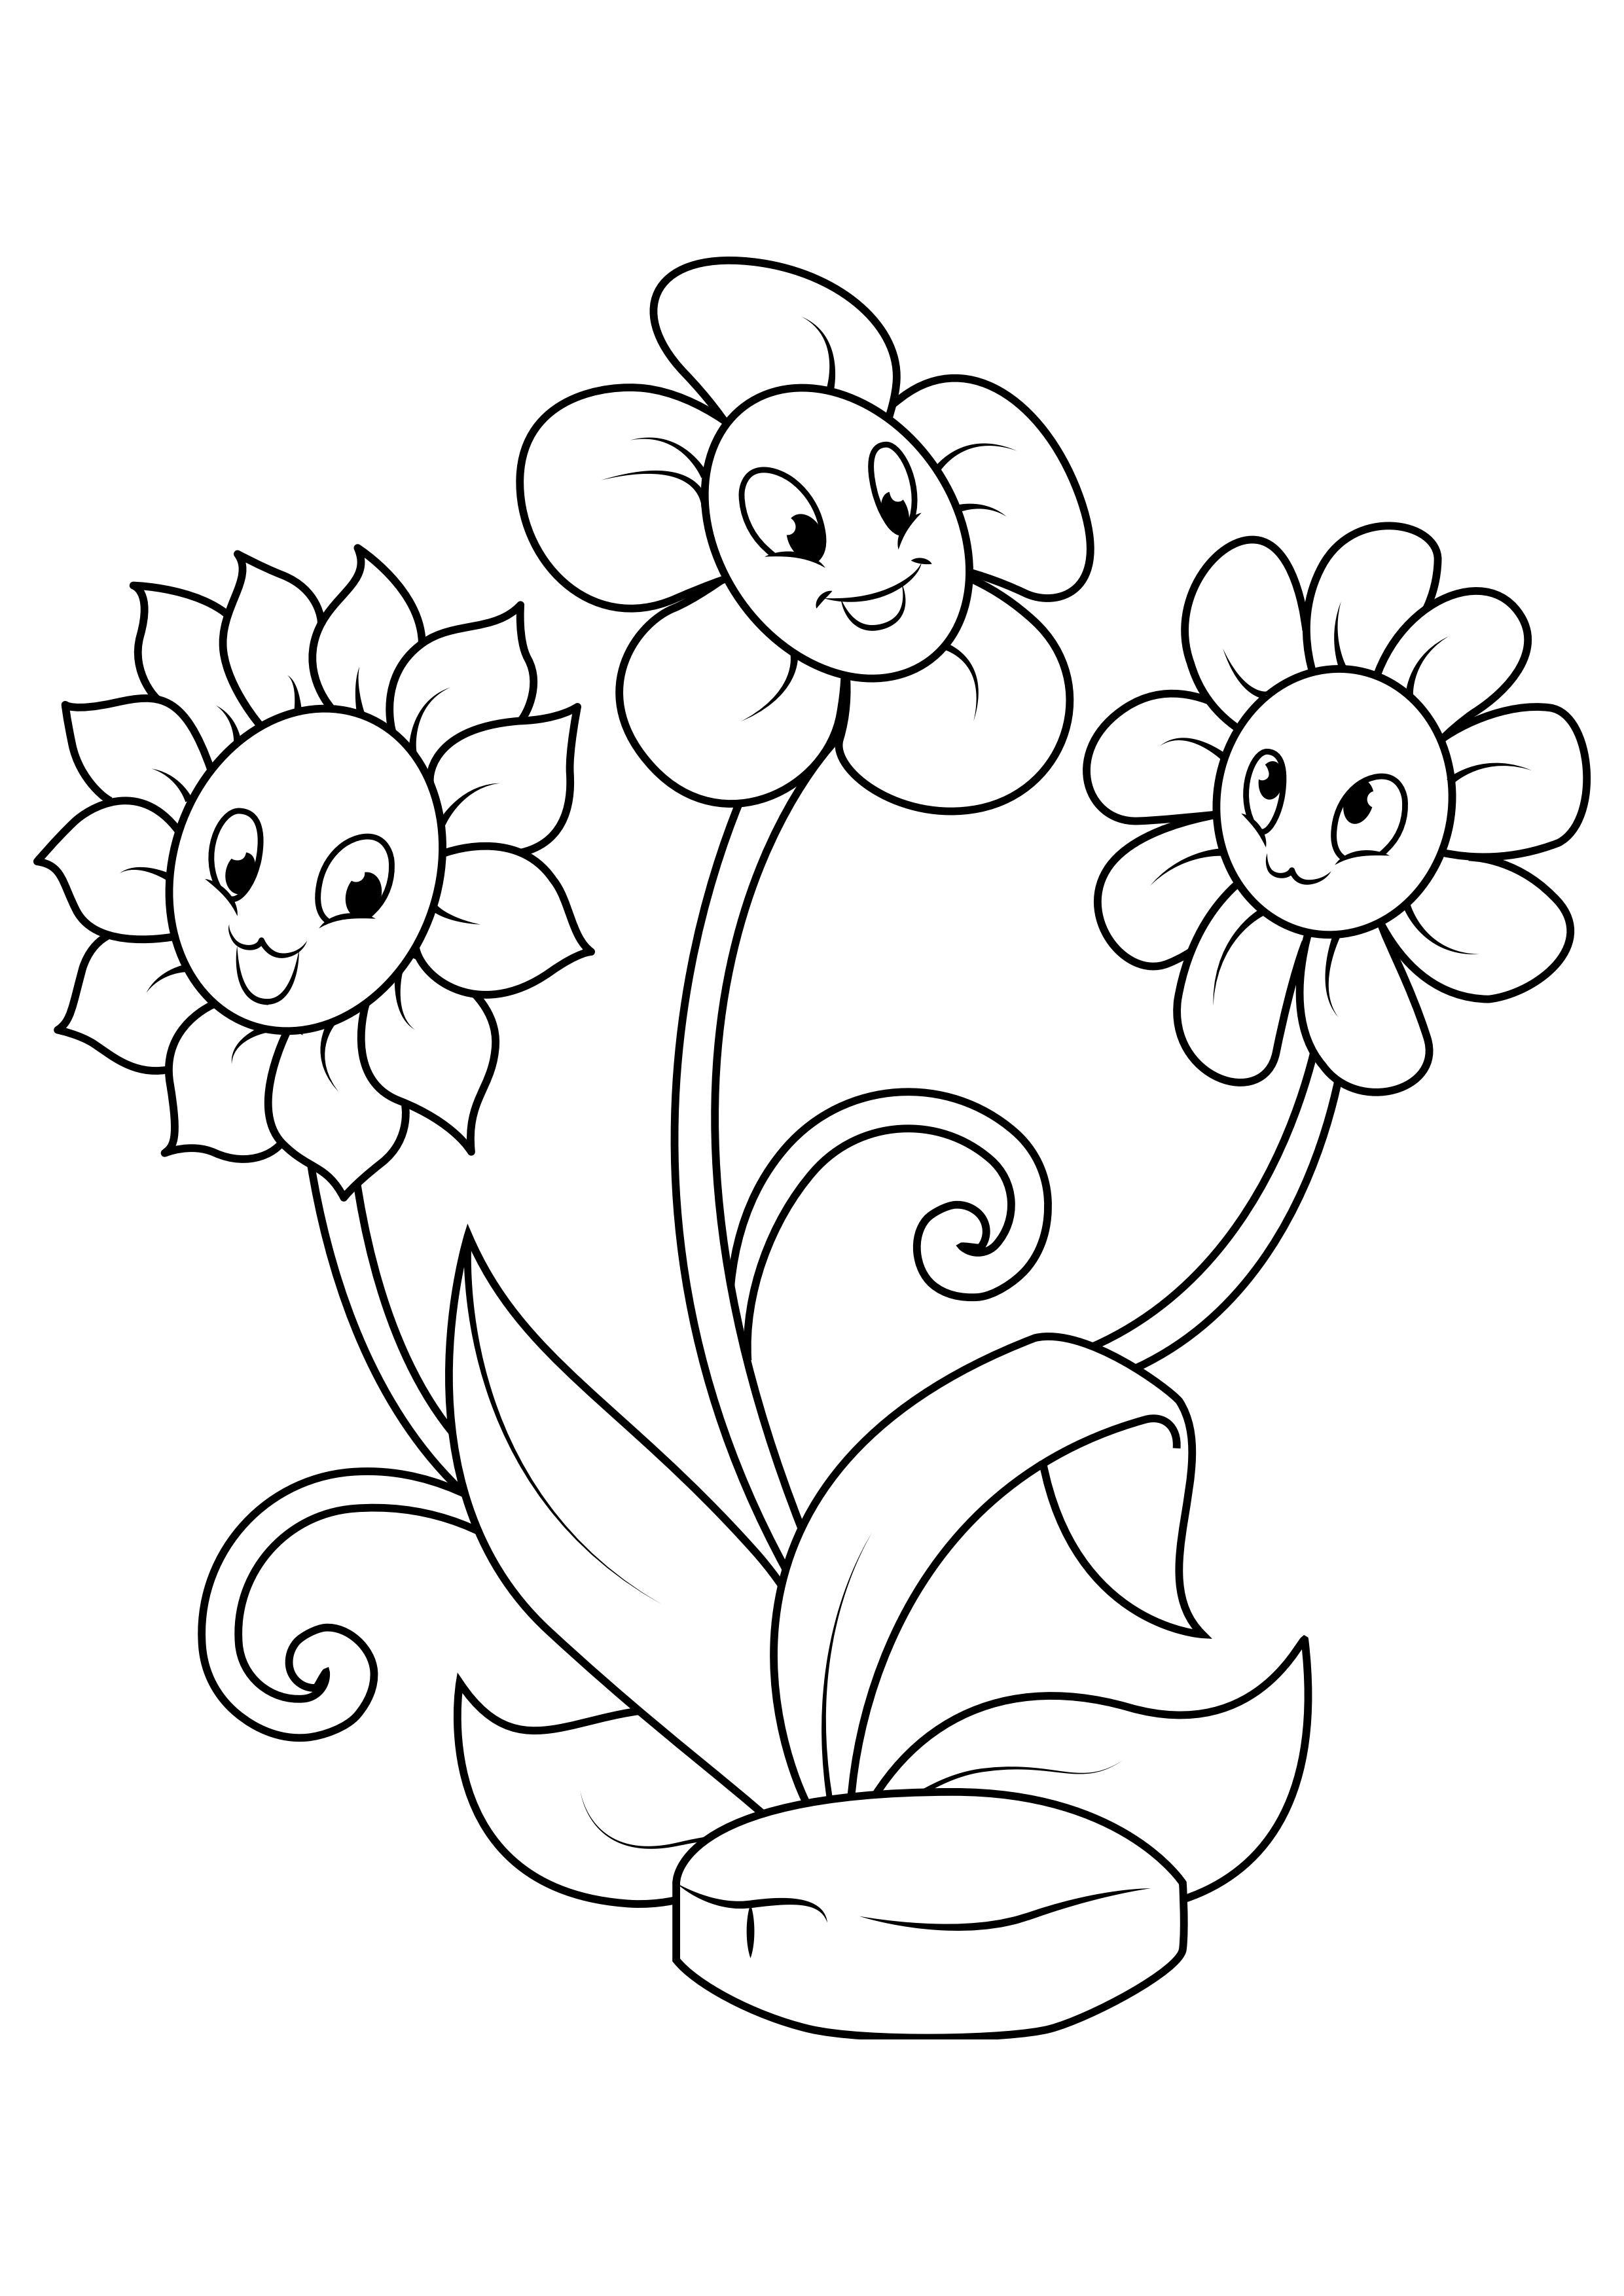 Coloring page three flowers